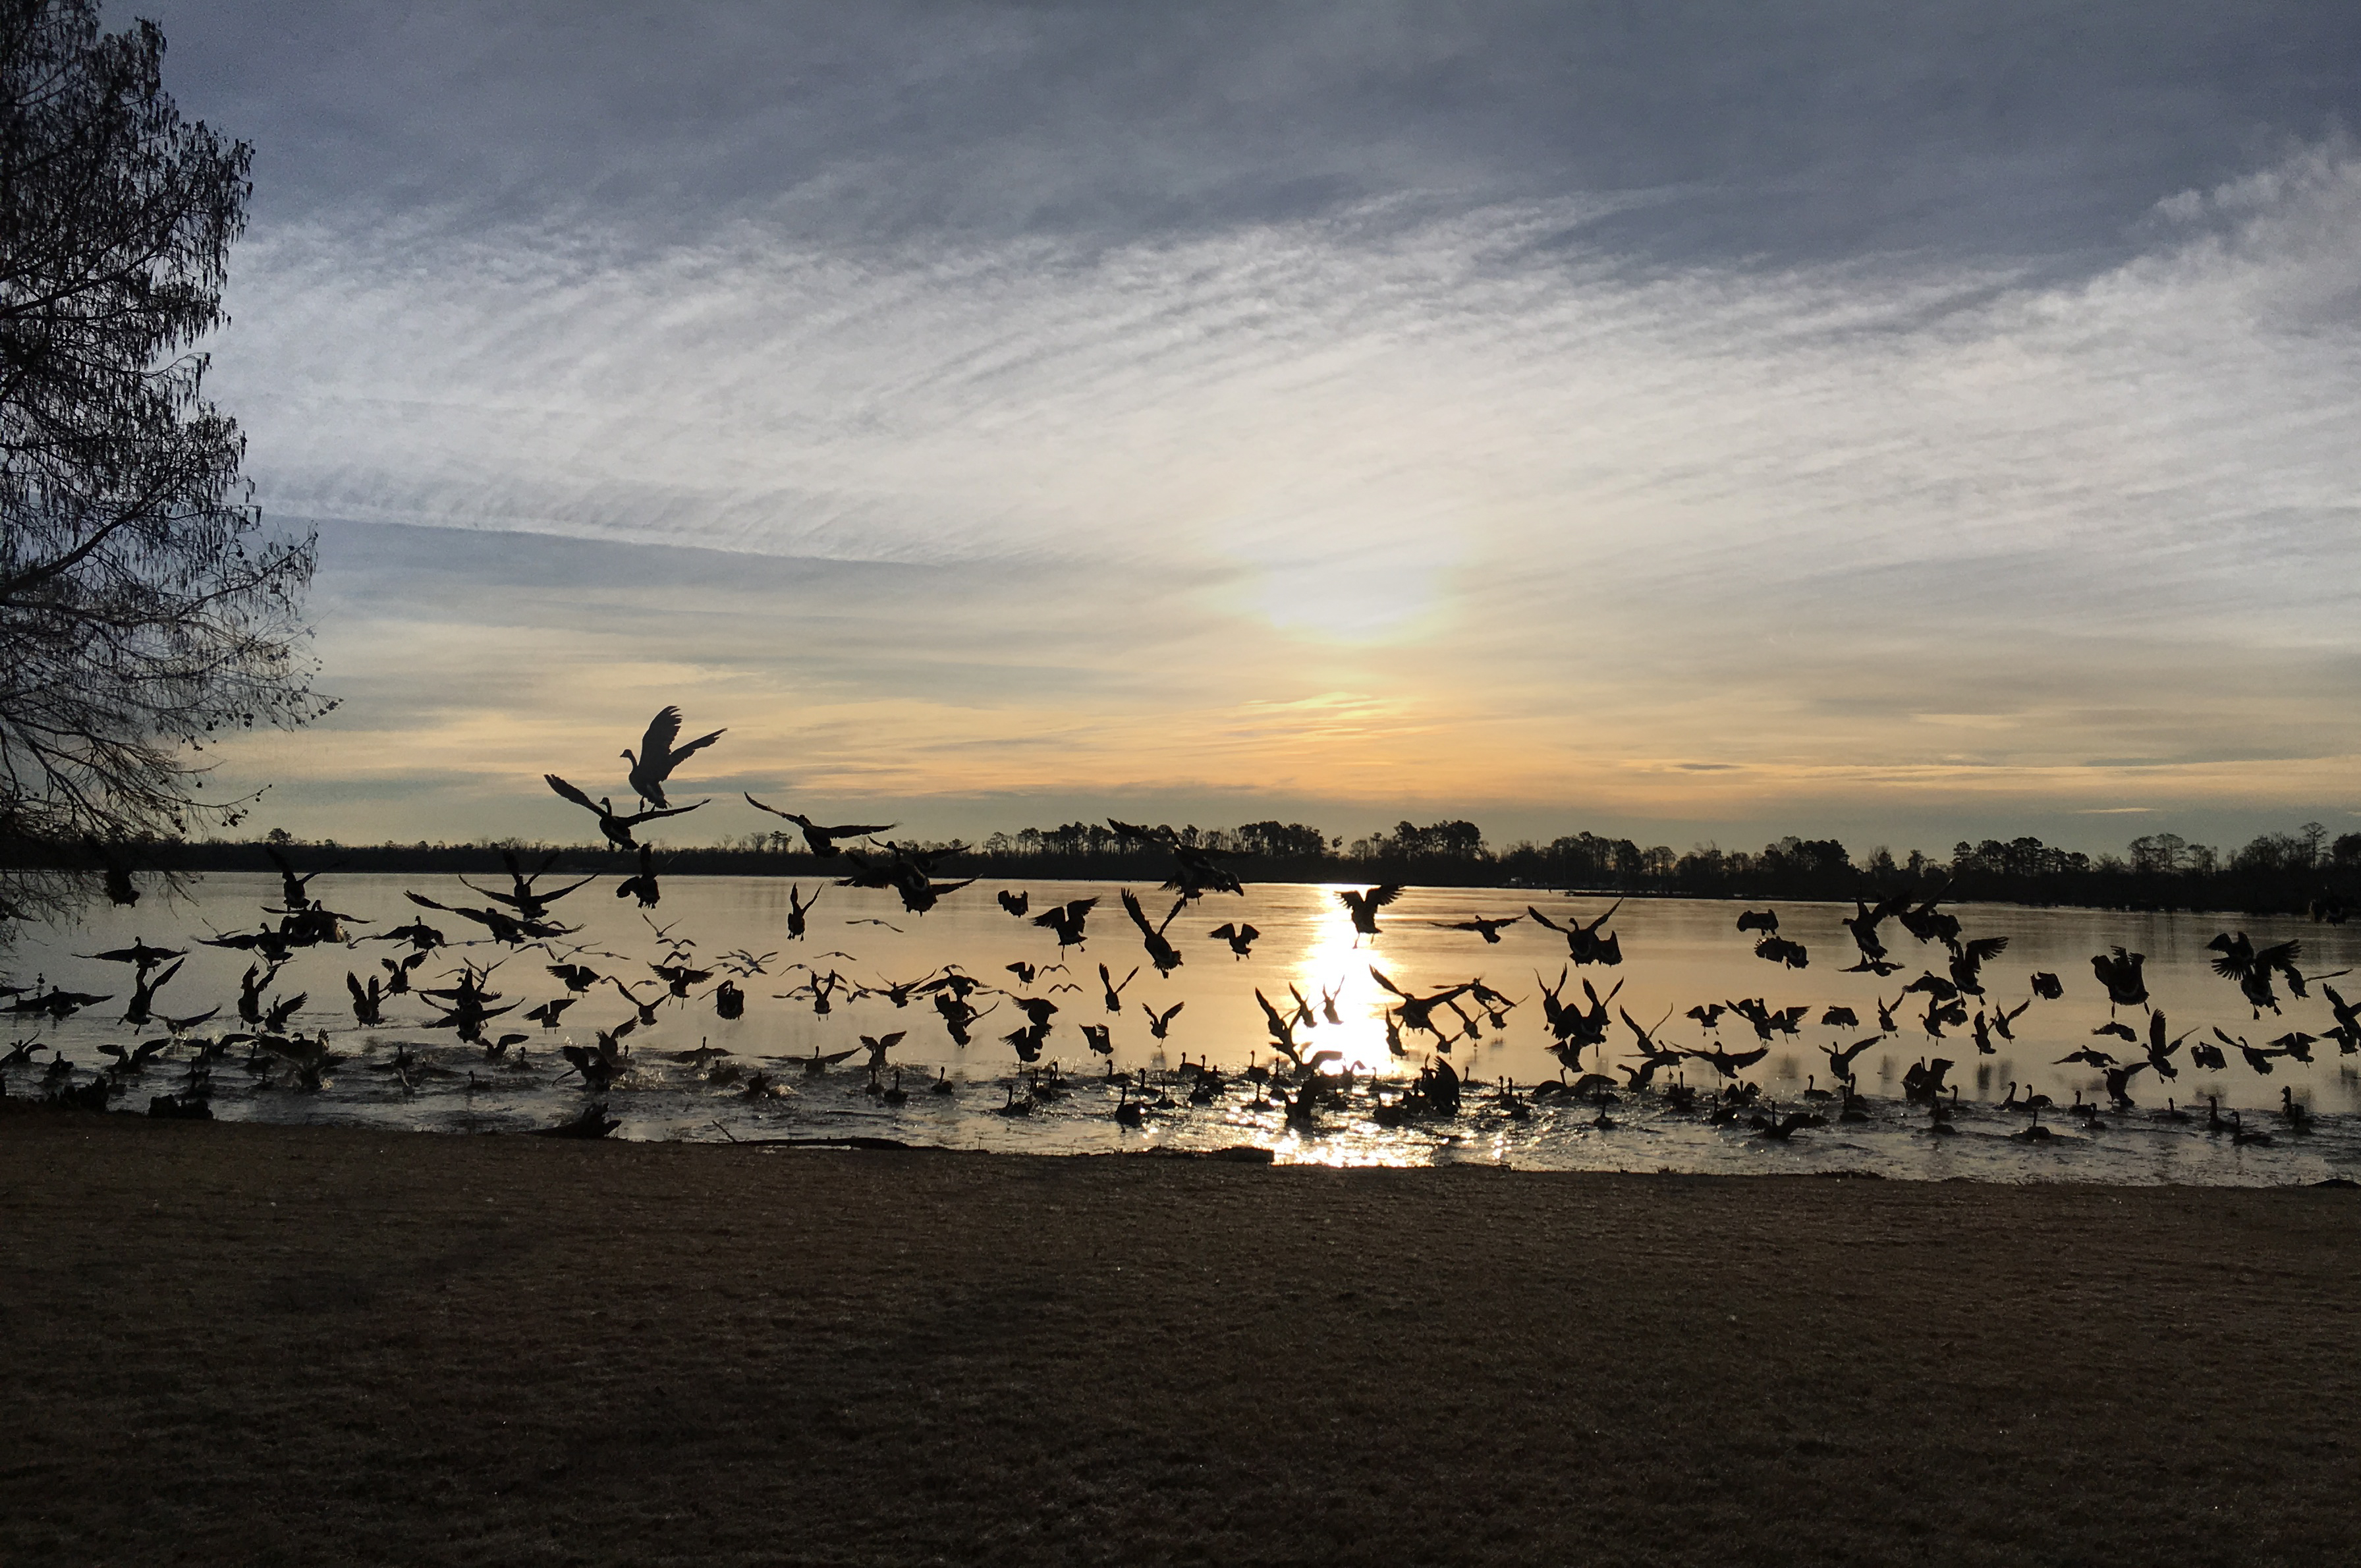 sillhouettes of waterfowl flying at dusk by the water